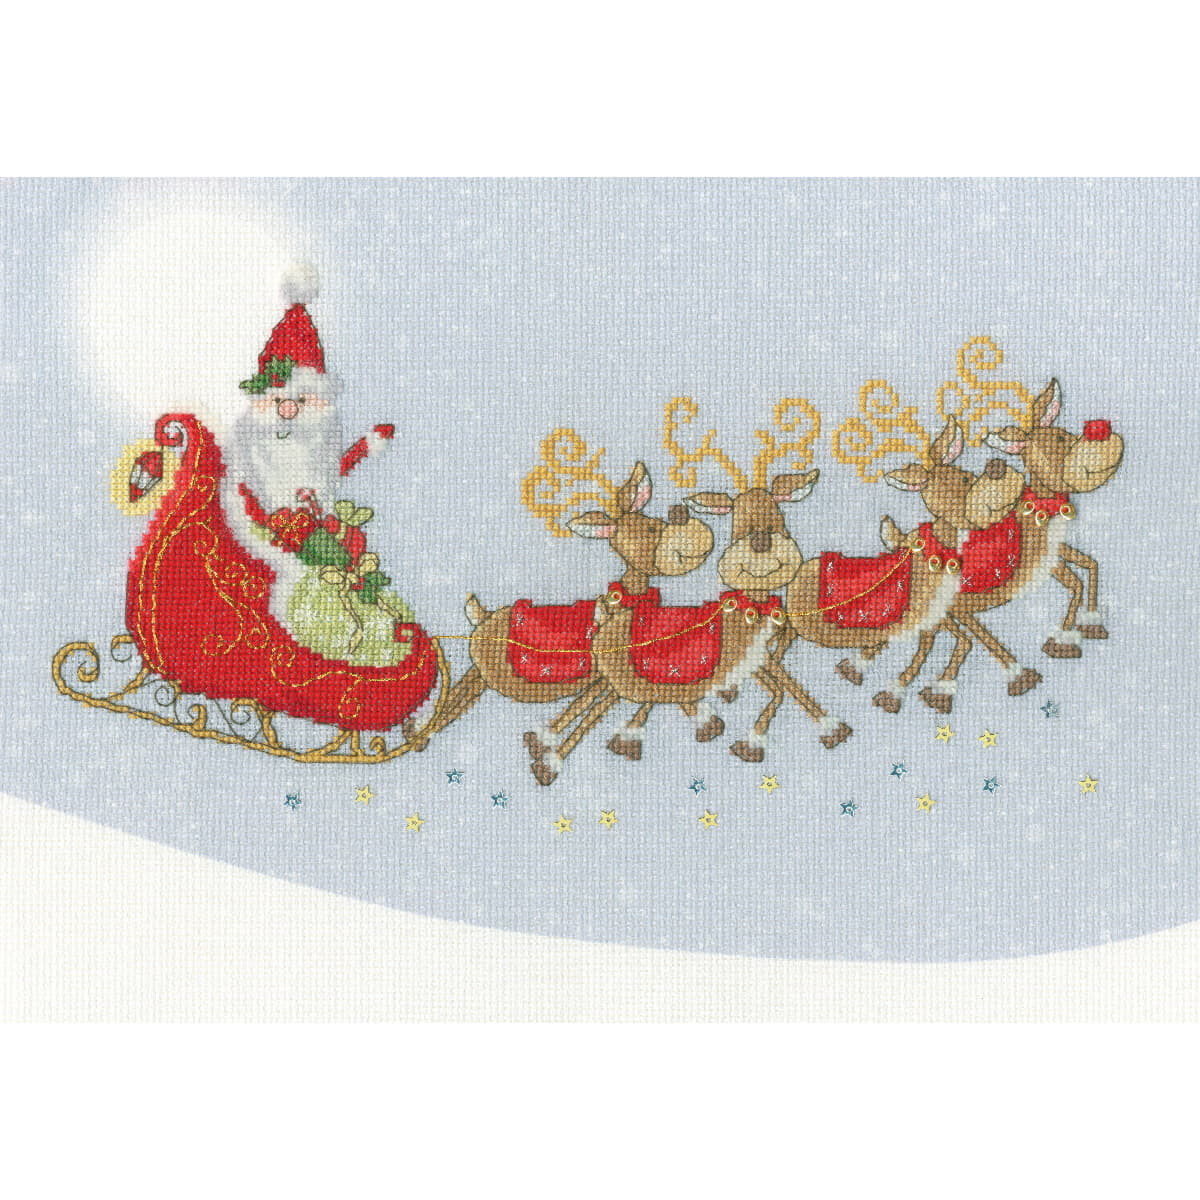 Bothy Threads counted cross stitch kit "Sleigh...